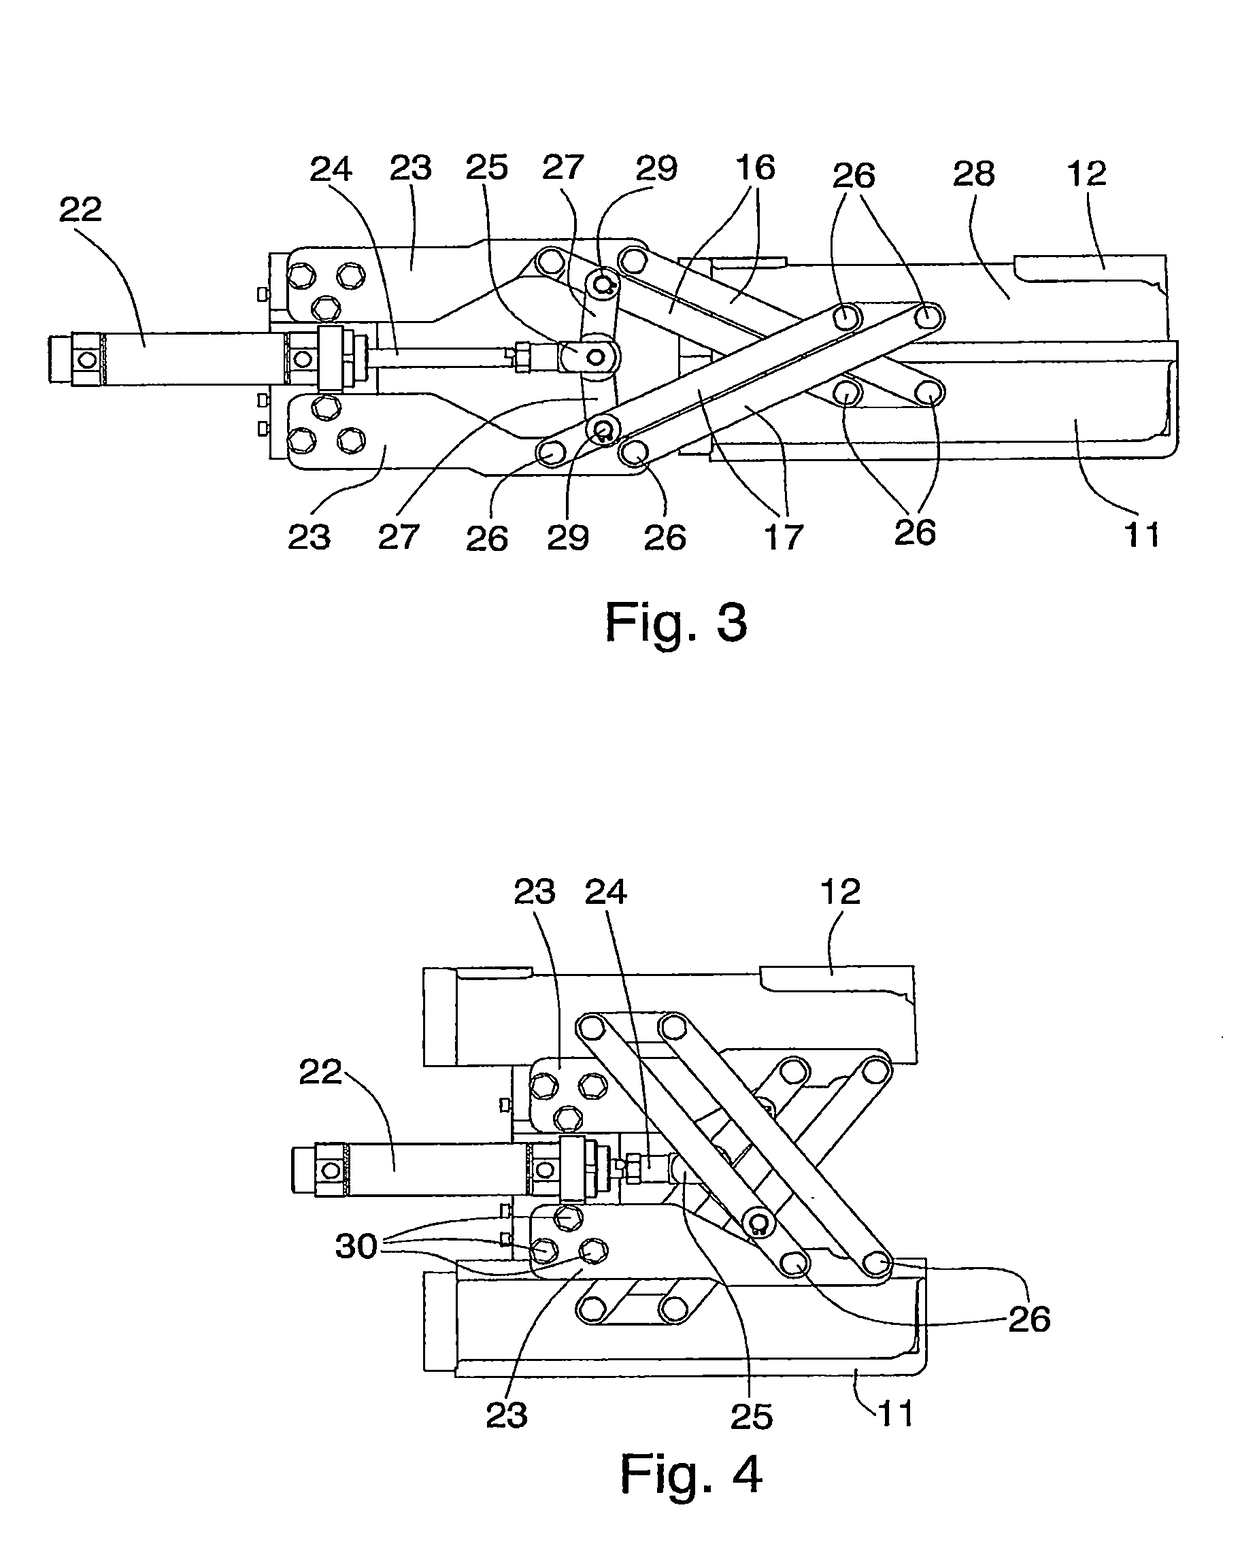 Device for cleaning and for processing the rectum and pelvis of slaughtered pigs and operating method of said device